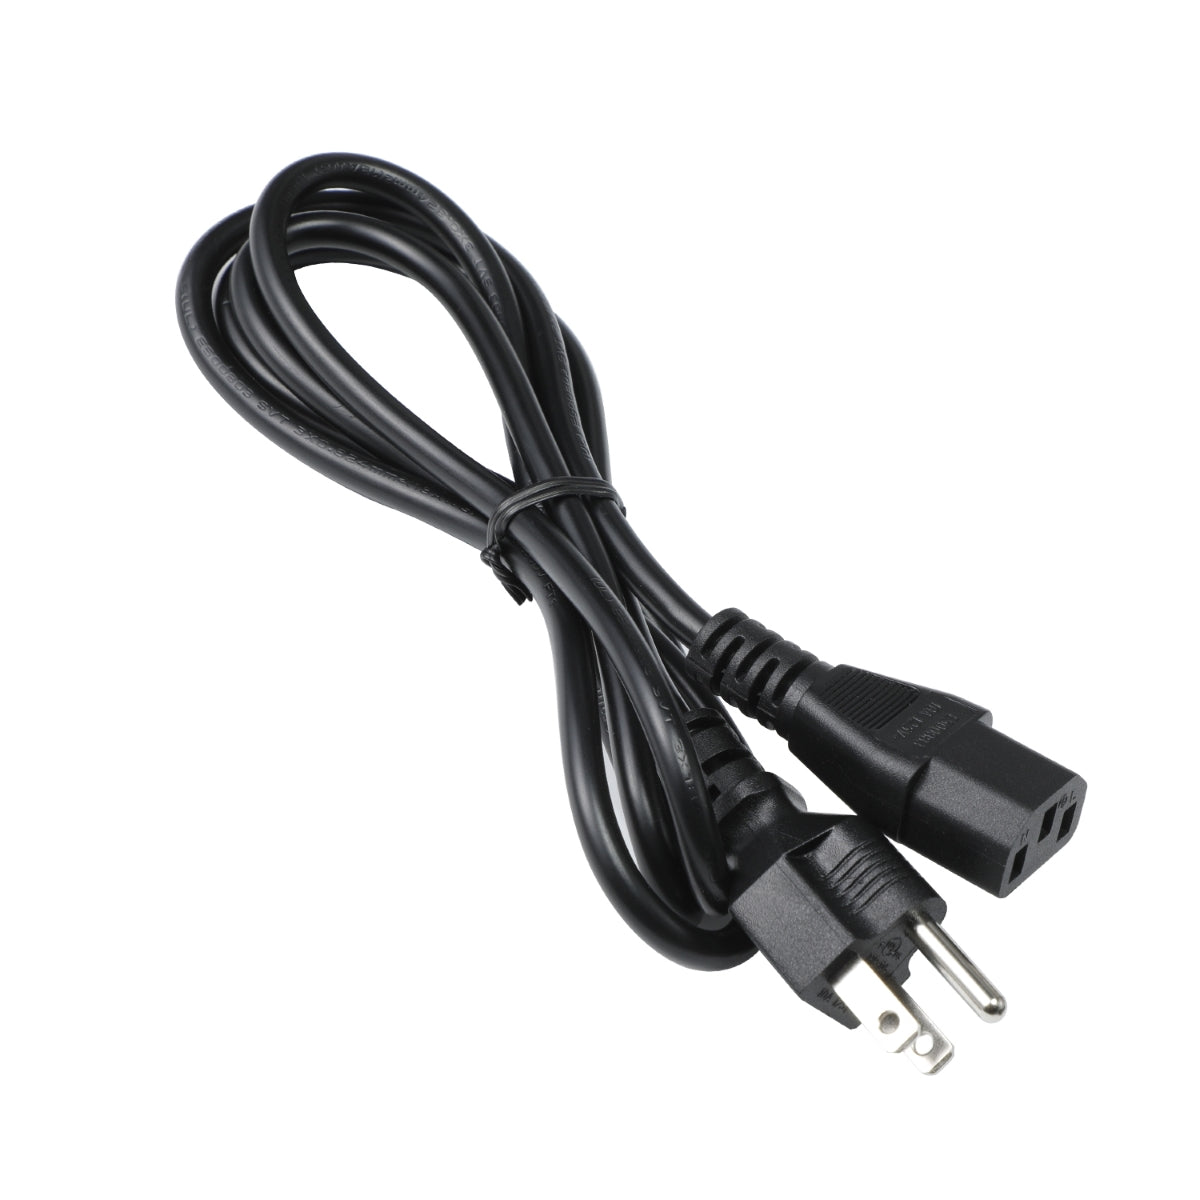 Power Cord for Acer XF251Q Monitor.